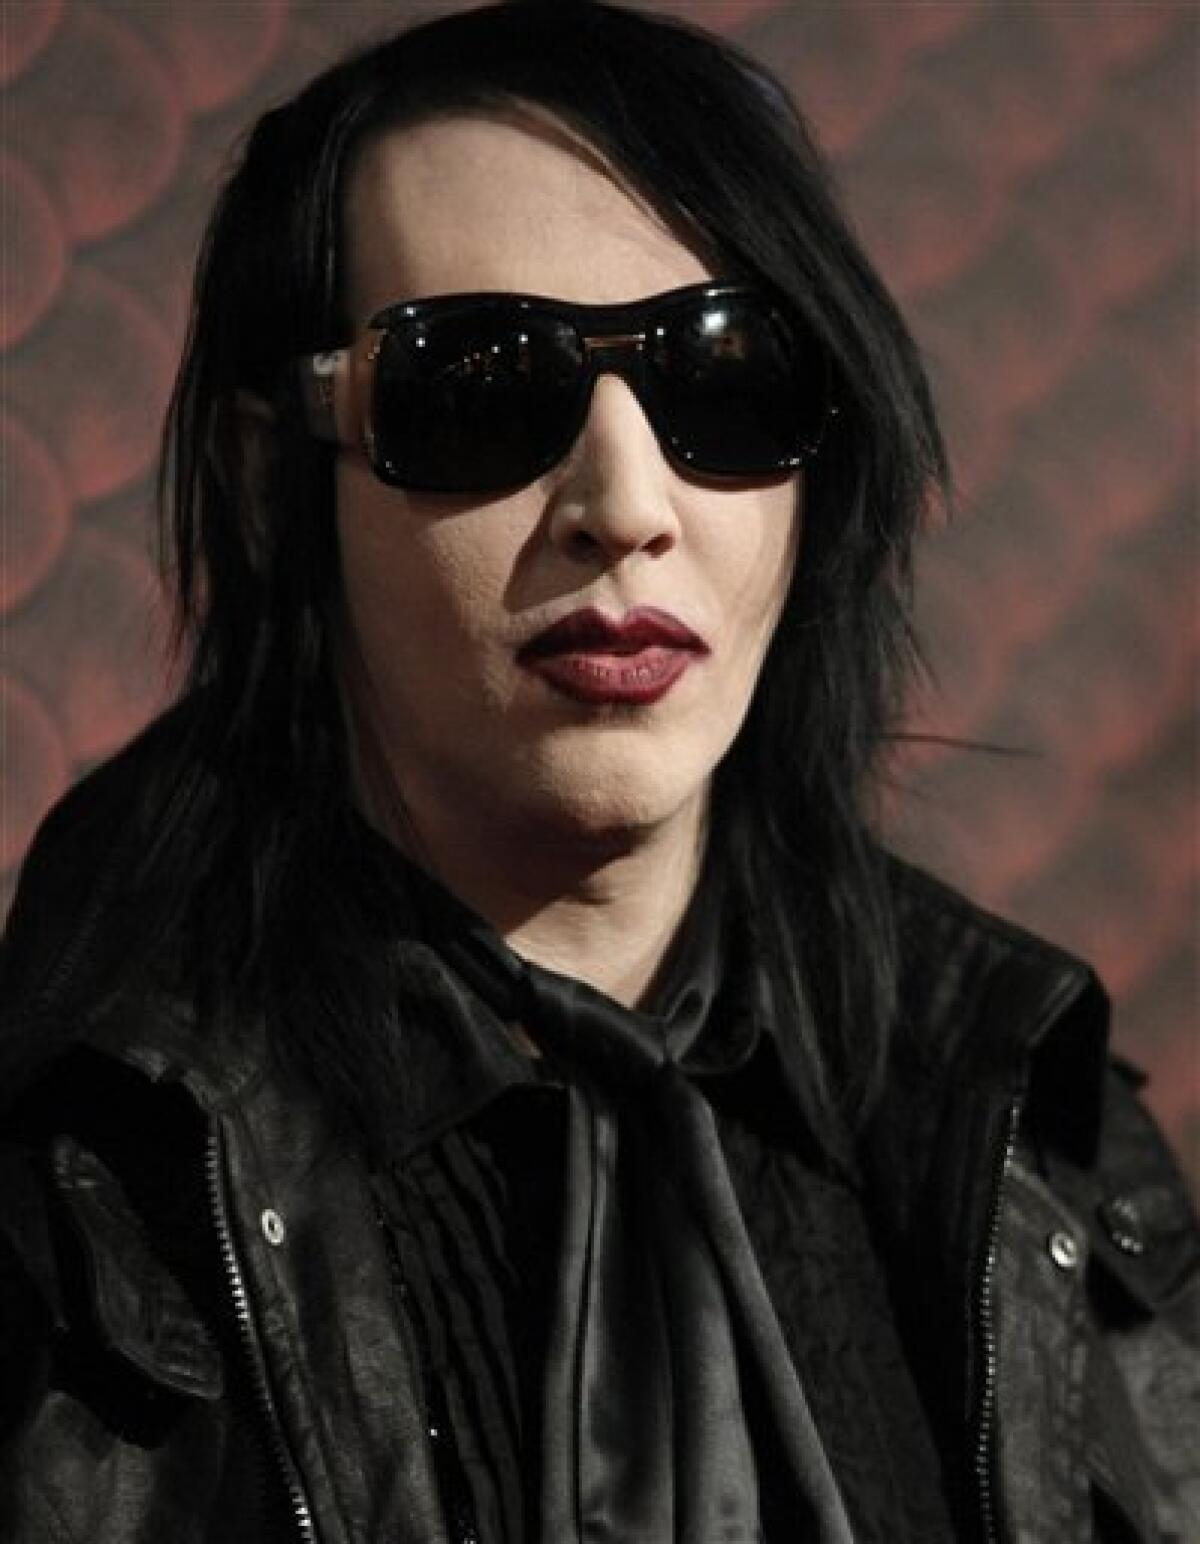 In this photo taken on Saturday, Oct. 18, 2008, singer Marilyn Manson poses on the press line at the Scream Awards in Los Angeles. (AP Photo/Dan Steinberg)